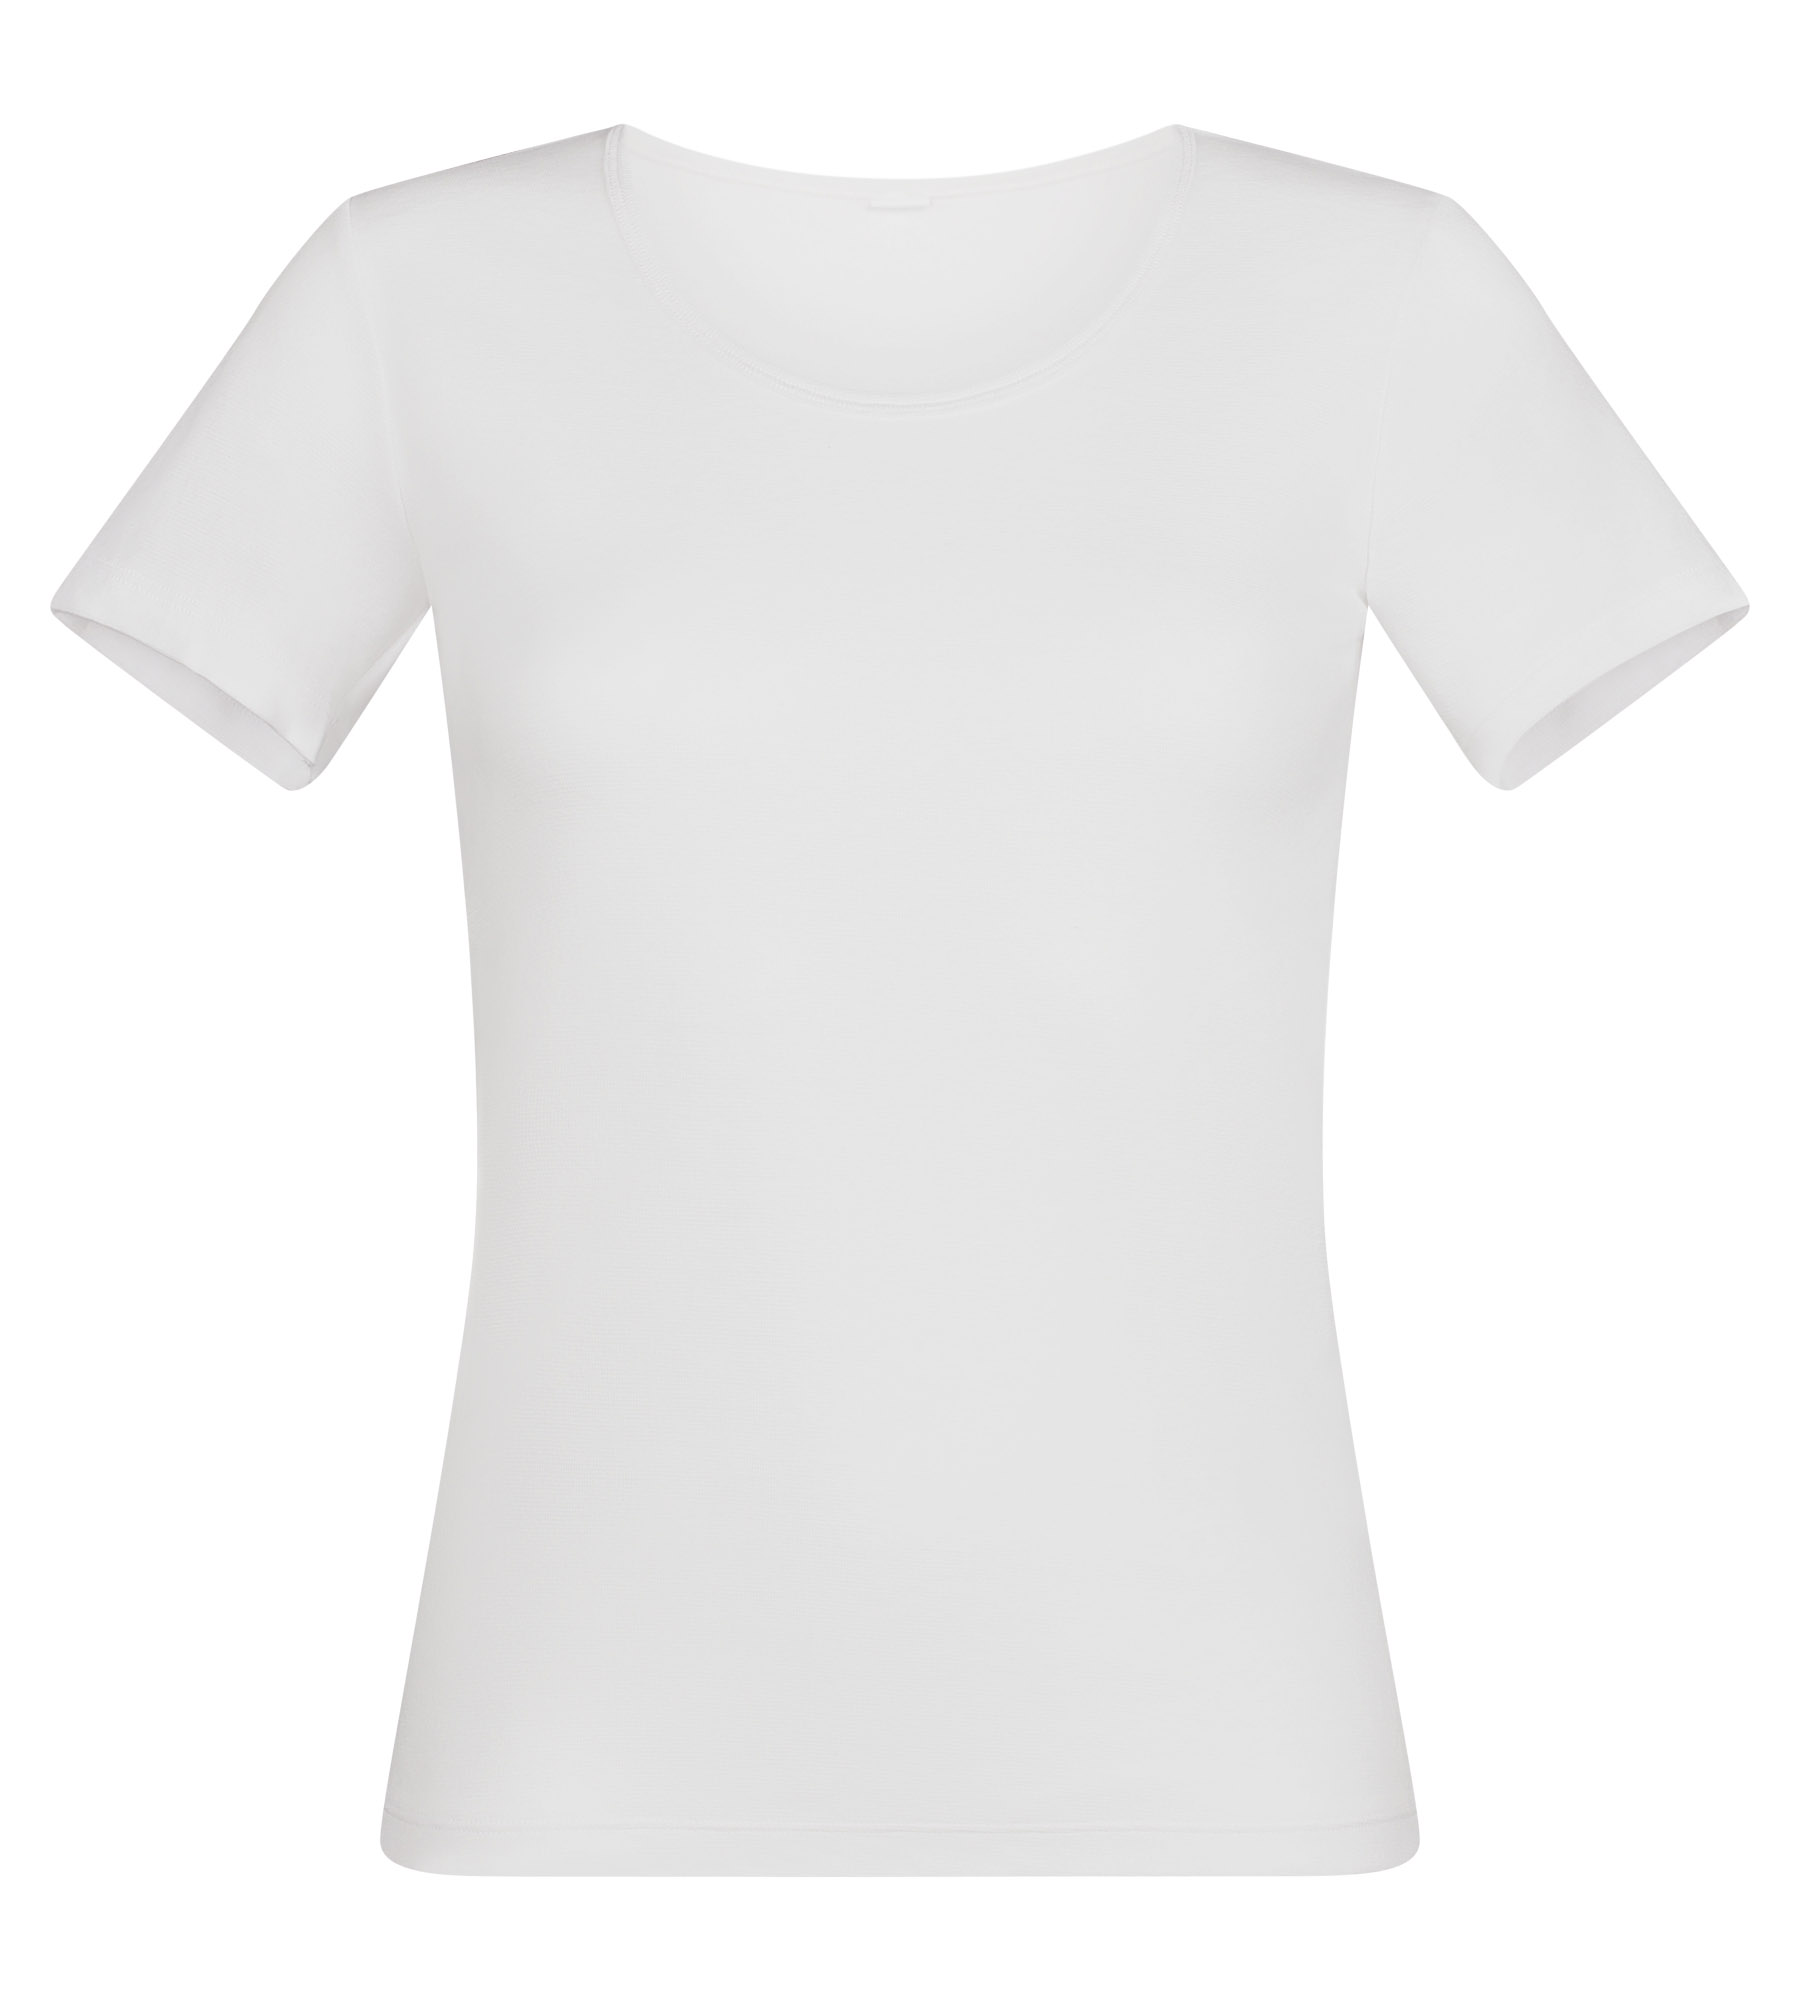 Short-sleeved t-shirt in white Cotton Liberty, , PLAYTEX